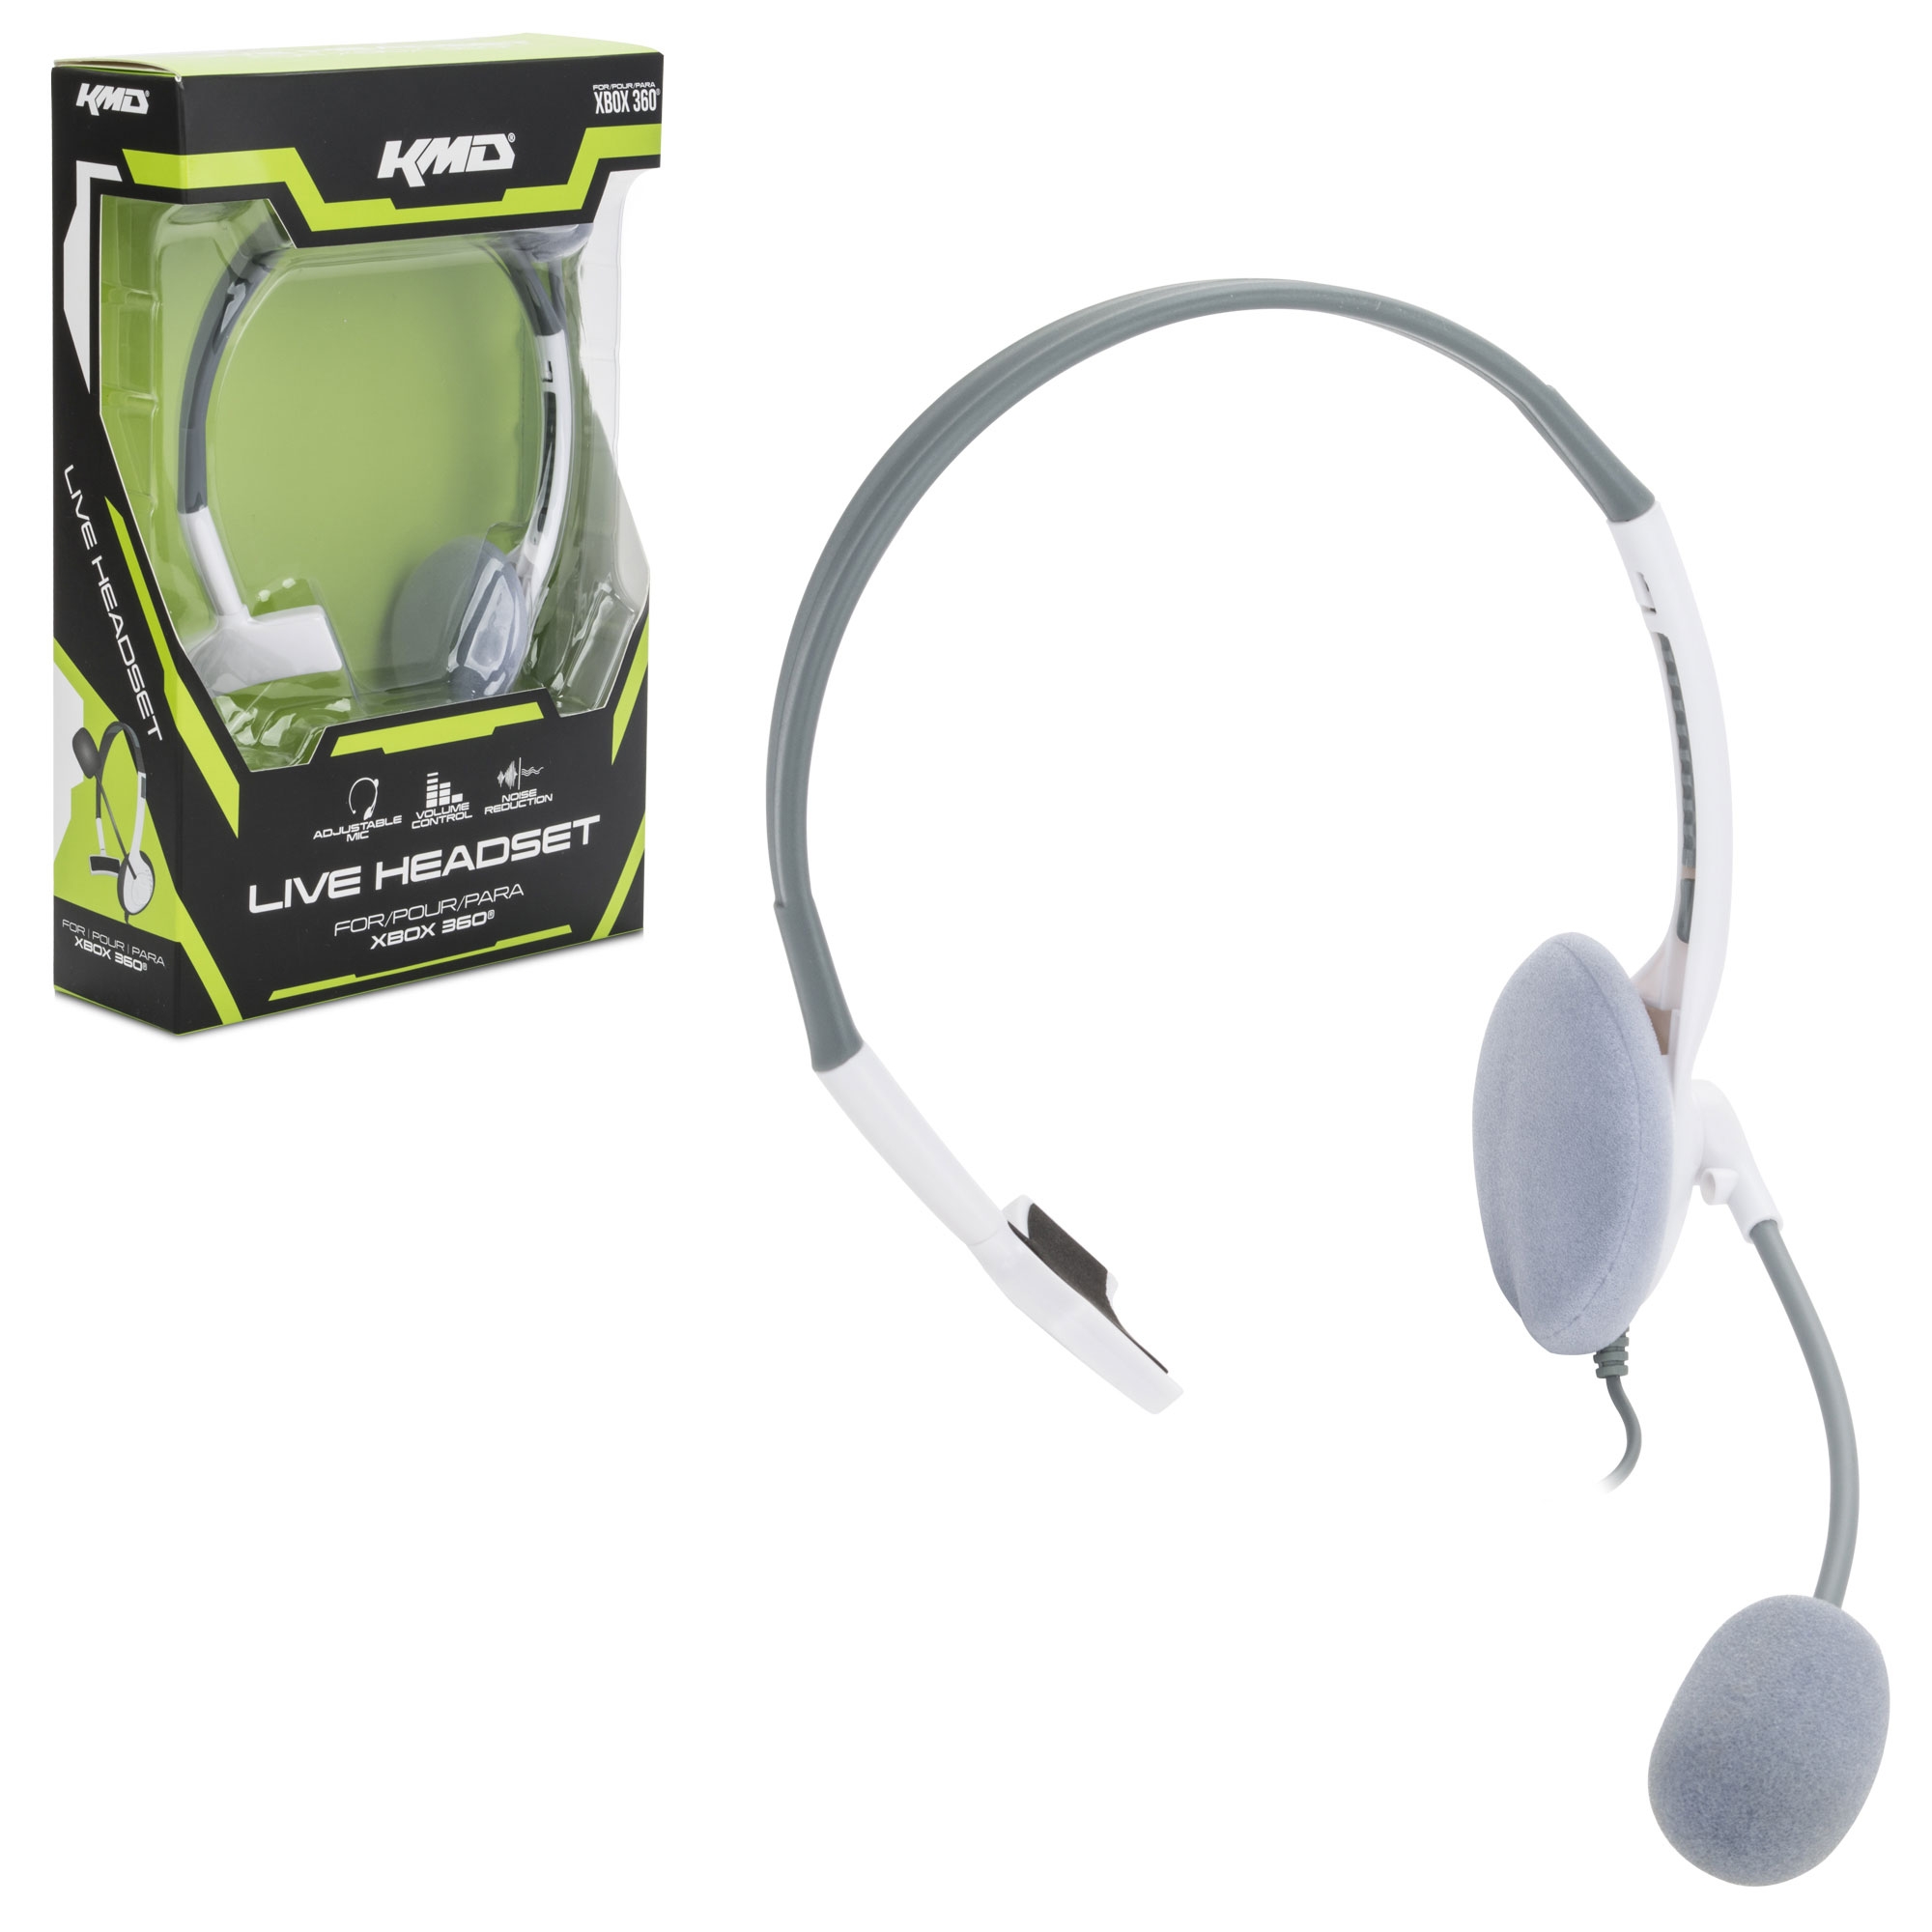 xbox 360 chat headset